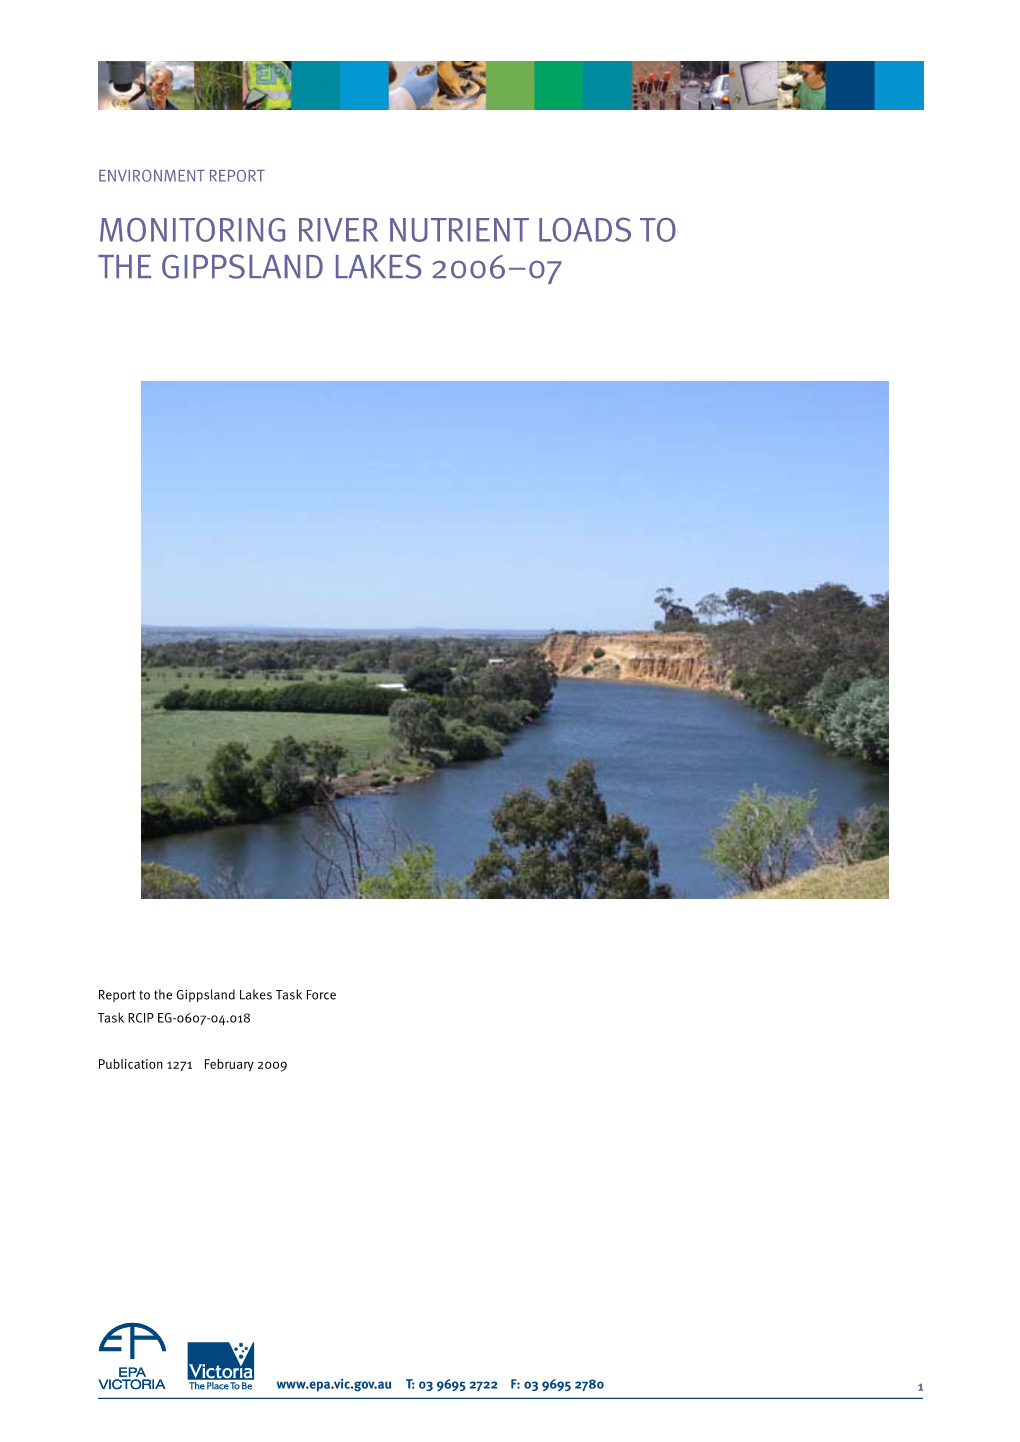 Monitoring River Nutrient Loads to the Gippsland Lakes 2006–07